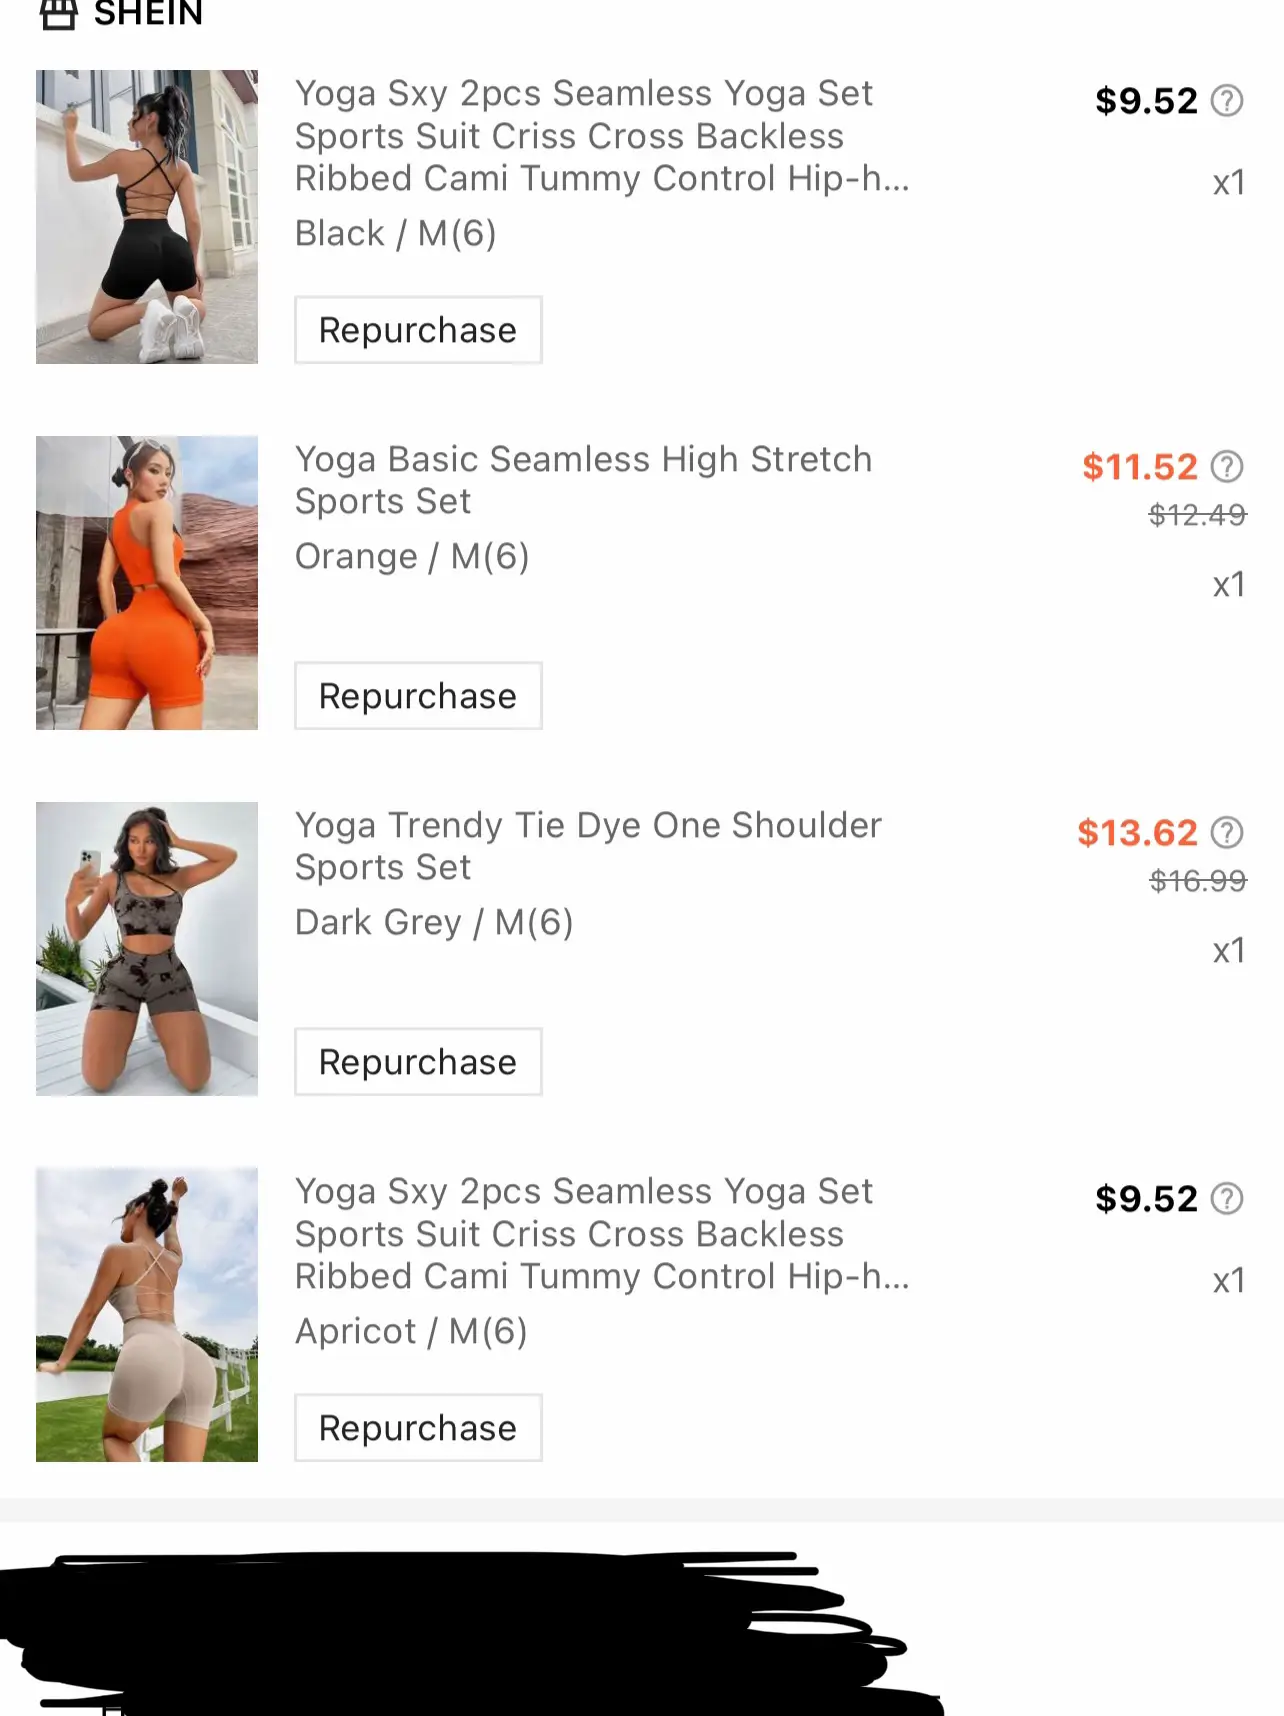 SHEIN ACTIVEWEAR TRY-ON HAUL  seamless, affordable #sheinhaul